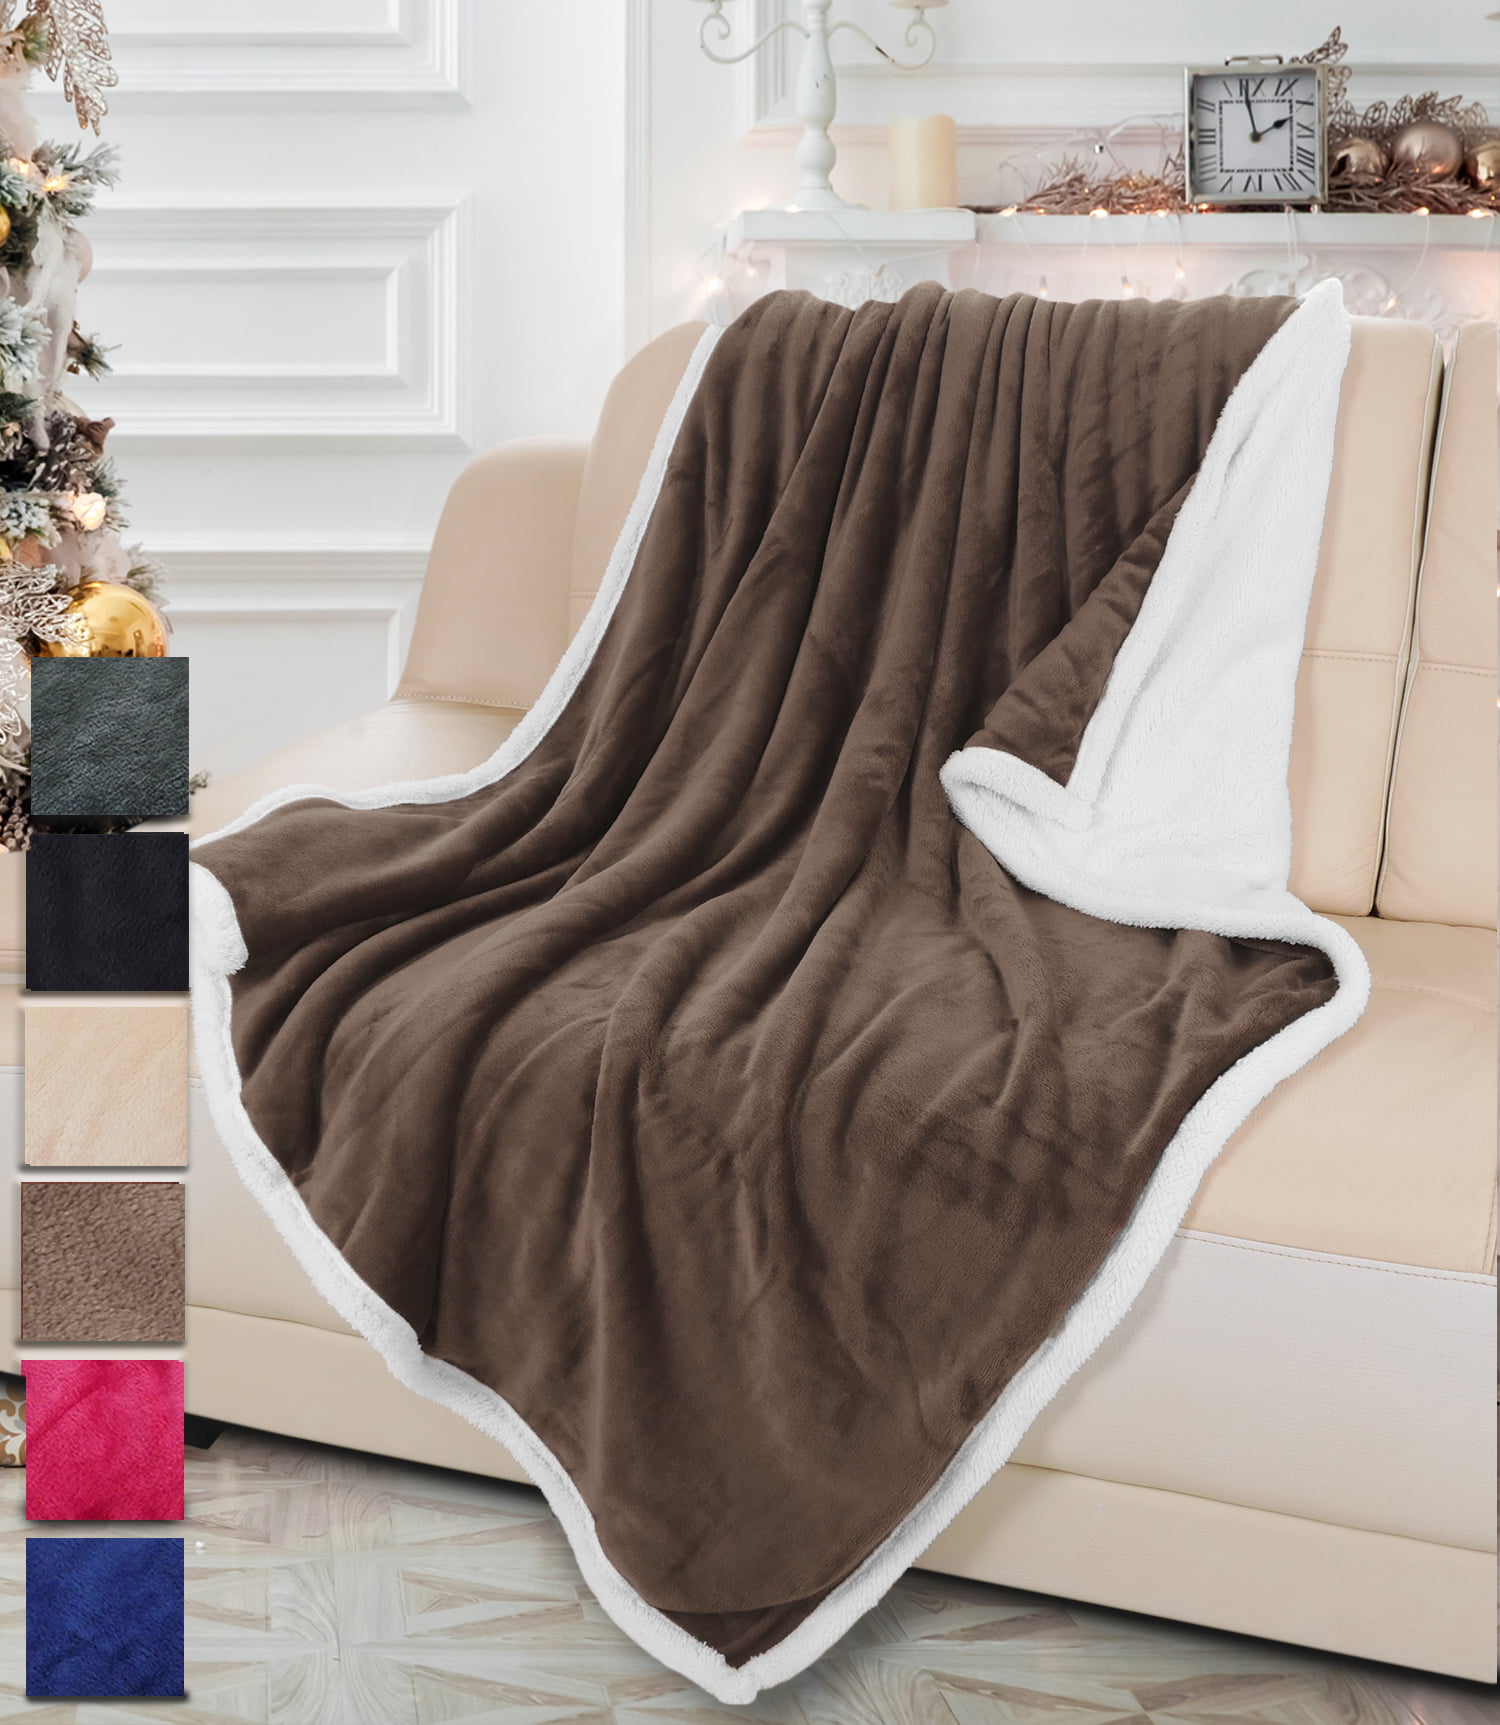 All Season Soft Sherpa Throw Blanket for Bed Couch Sofa 59 x 79 Happy Mother's Day Red Heart and Flowers Caring Gift for Parents Kids Adults Warm Travelling Camping Blanket